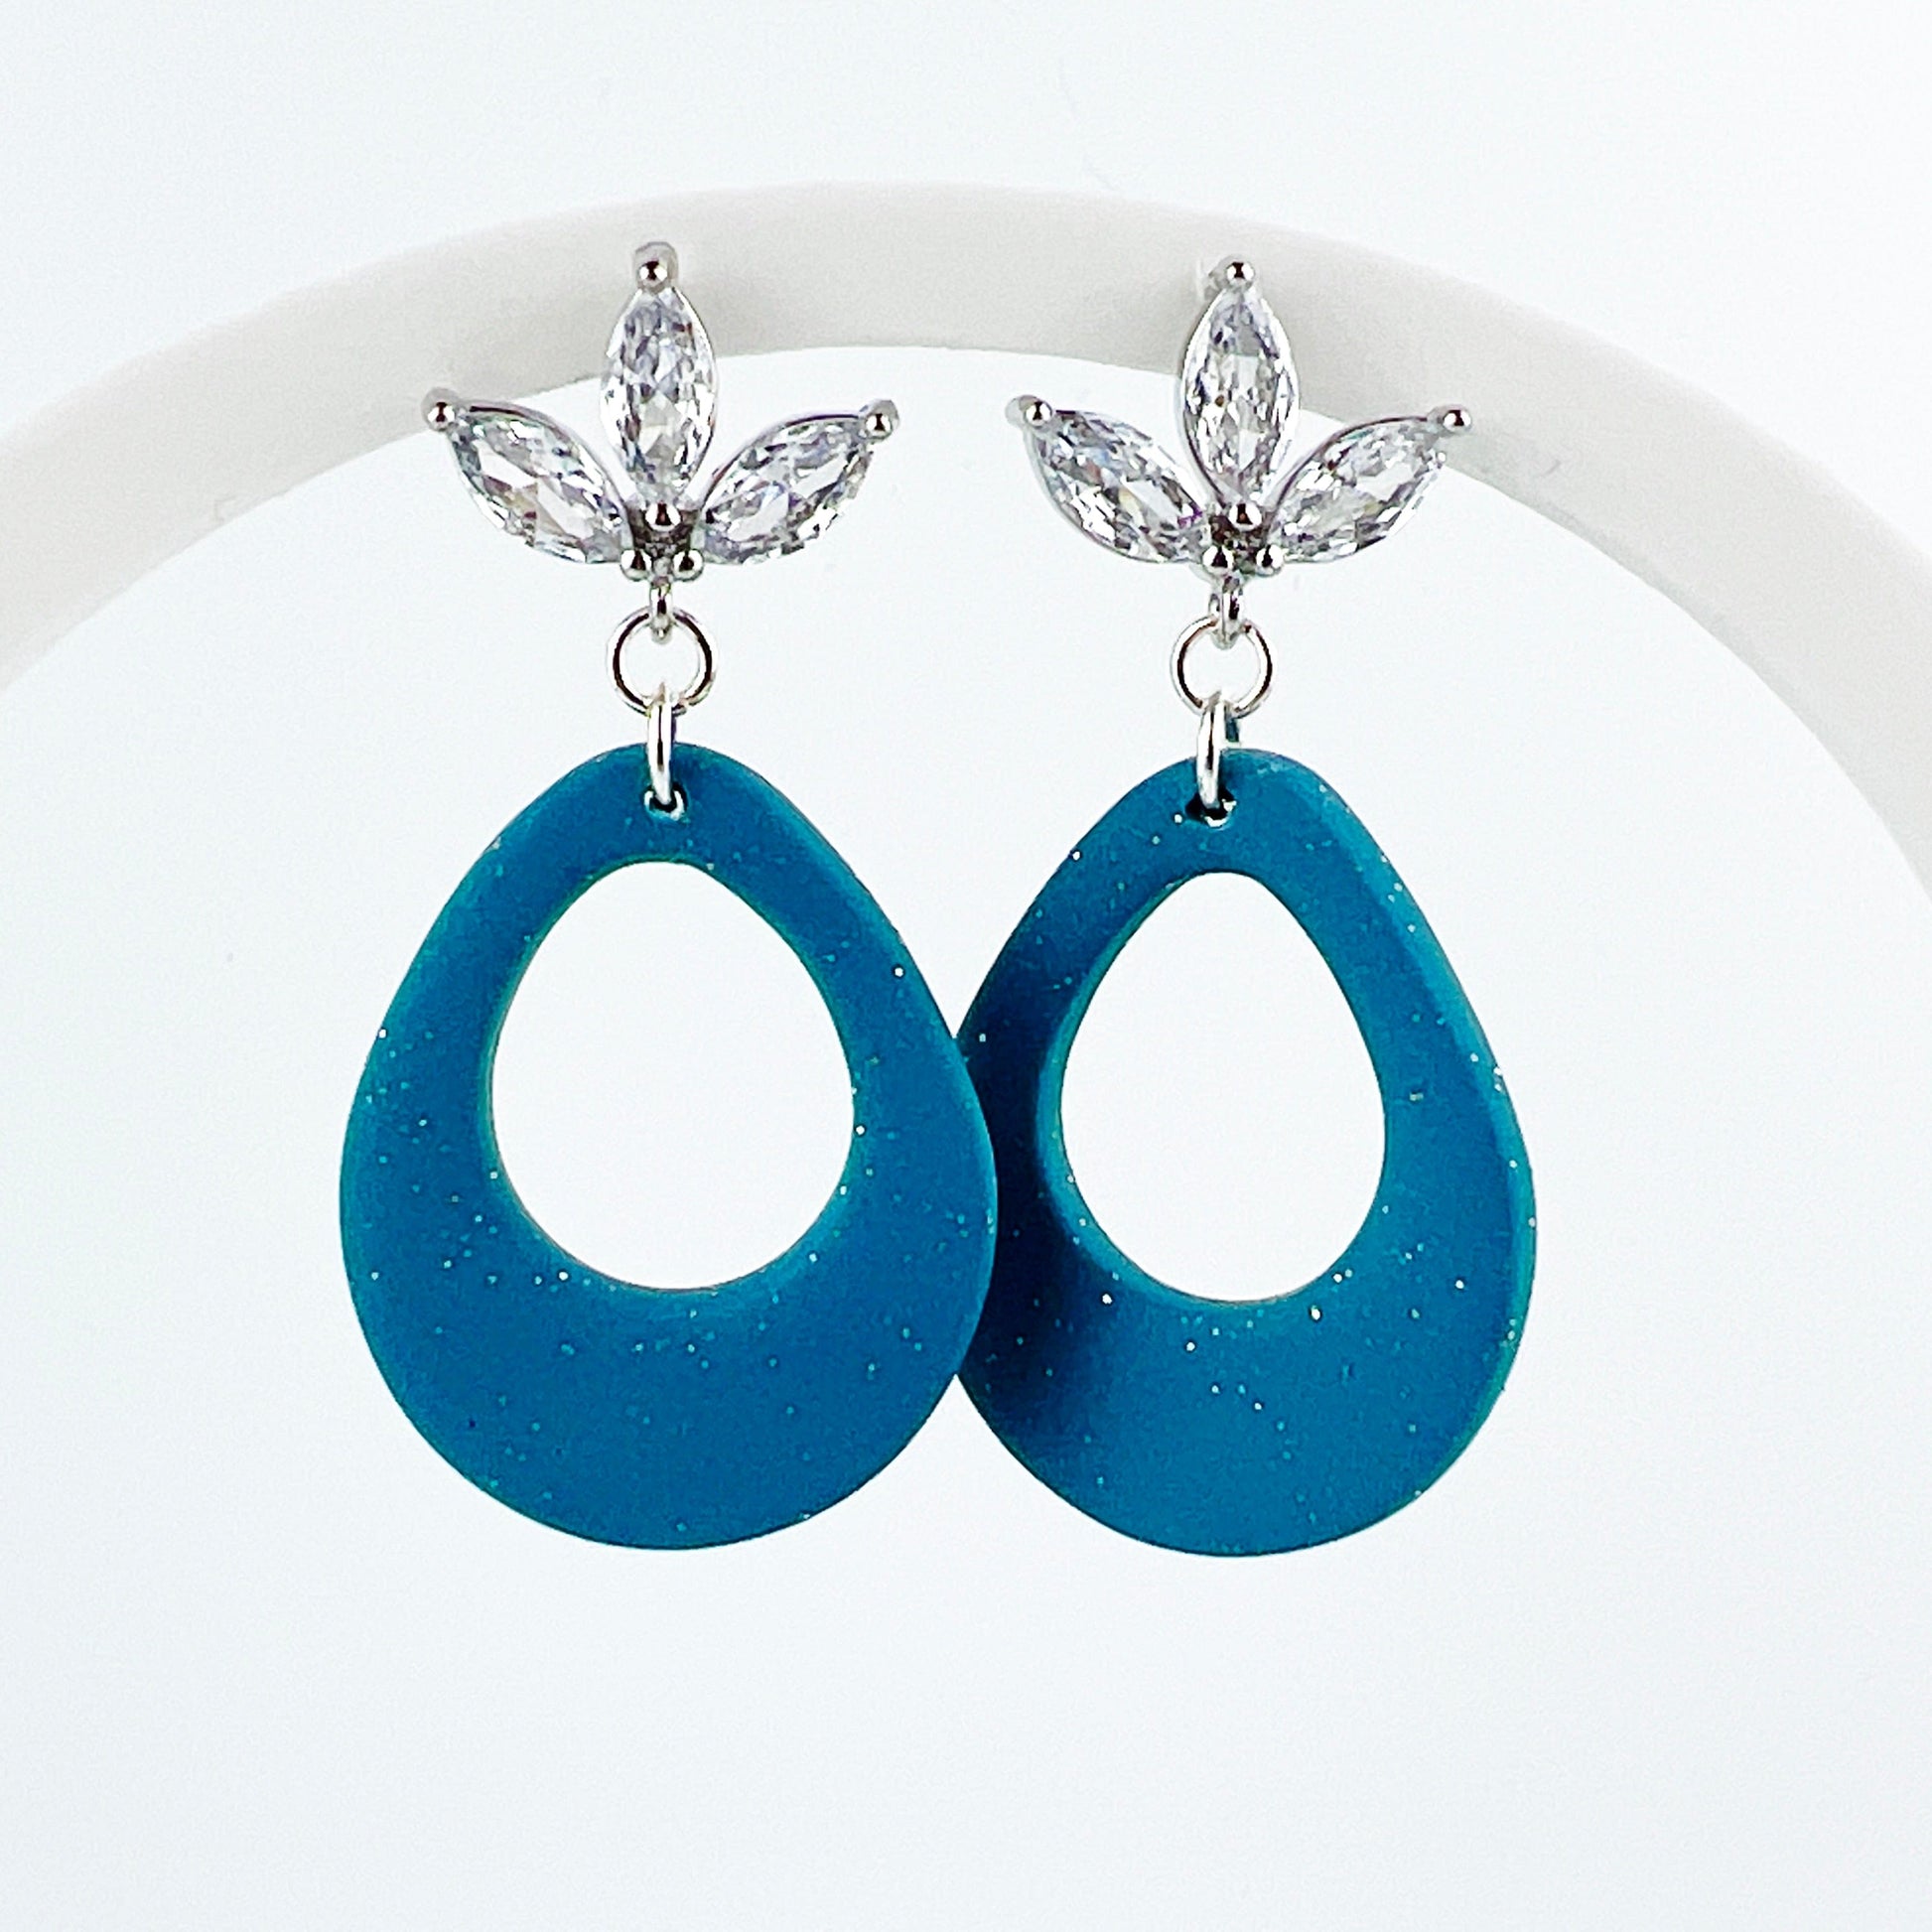 Earrings Kisa - Shimmering Turquoise Teardrop with Floral Cubic Zirconia Posts